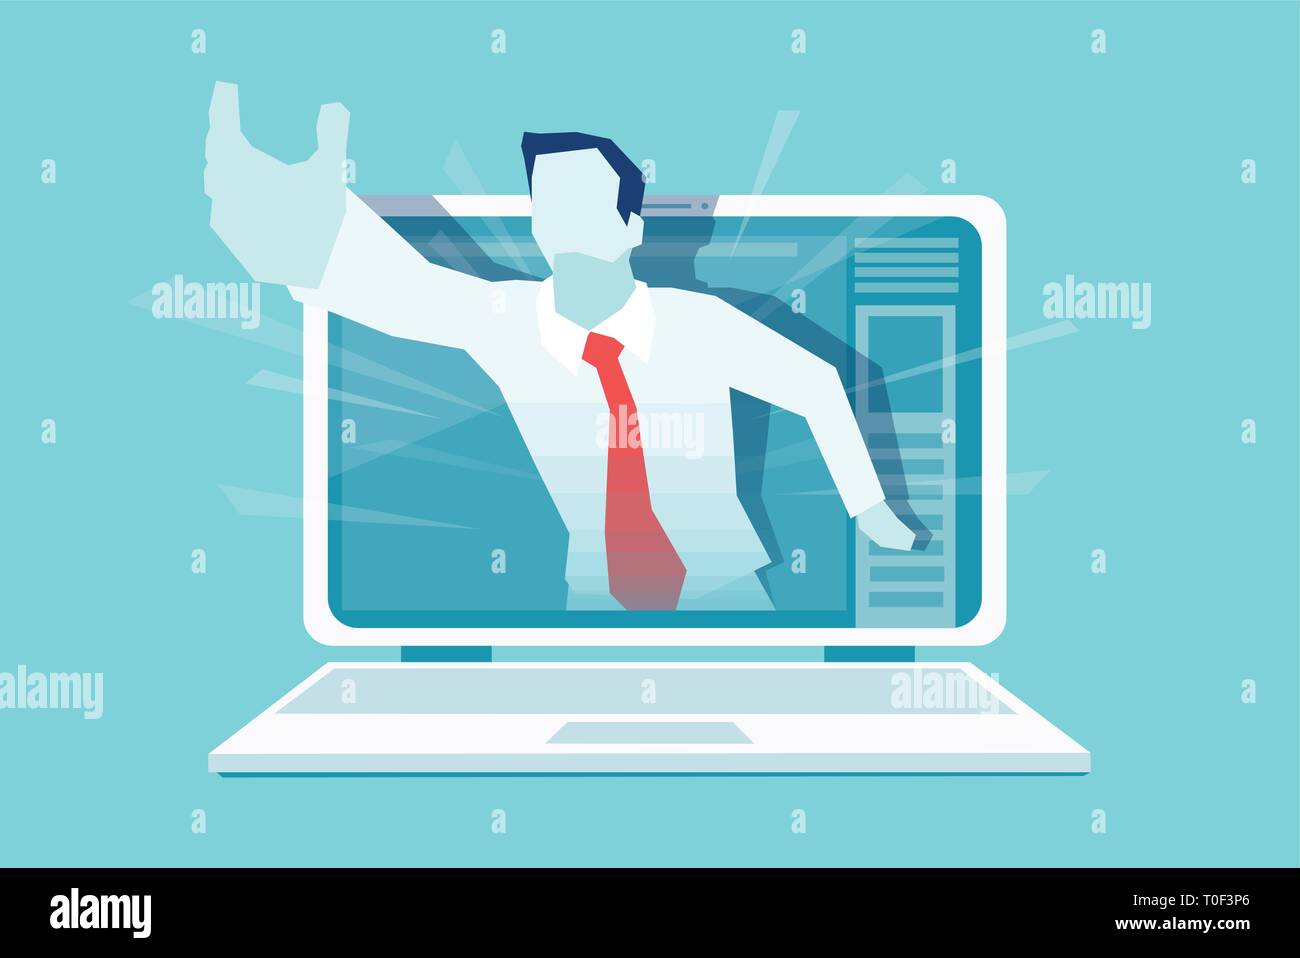 Vector of a businessman hand reaching out of the screen offering a help. Online customer service assistance concept Stock Vector